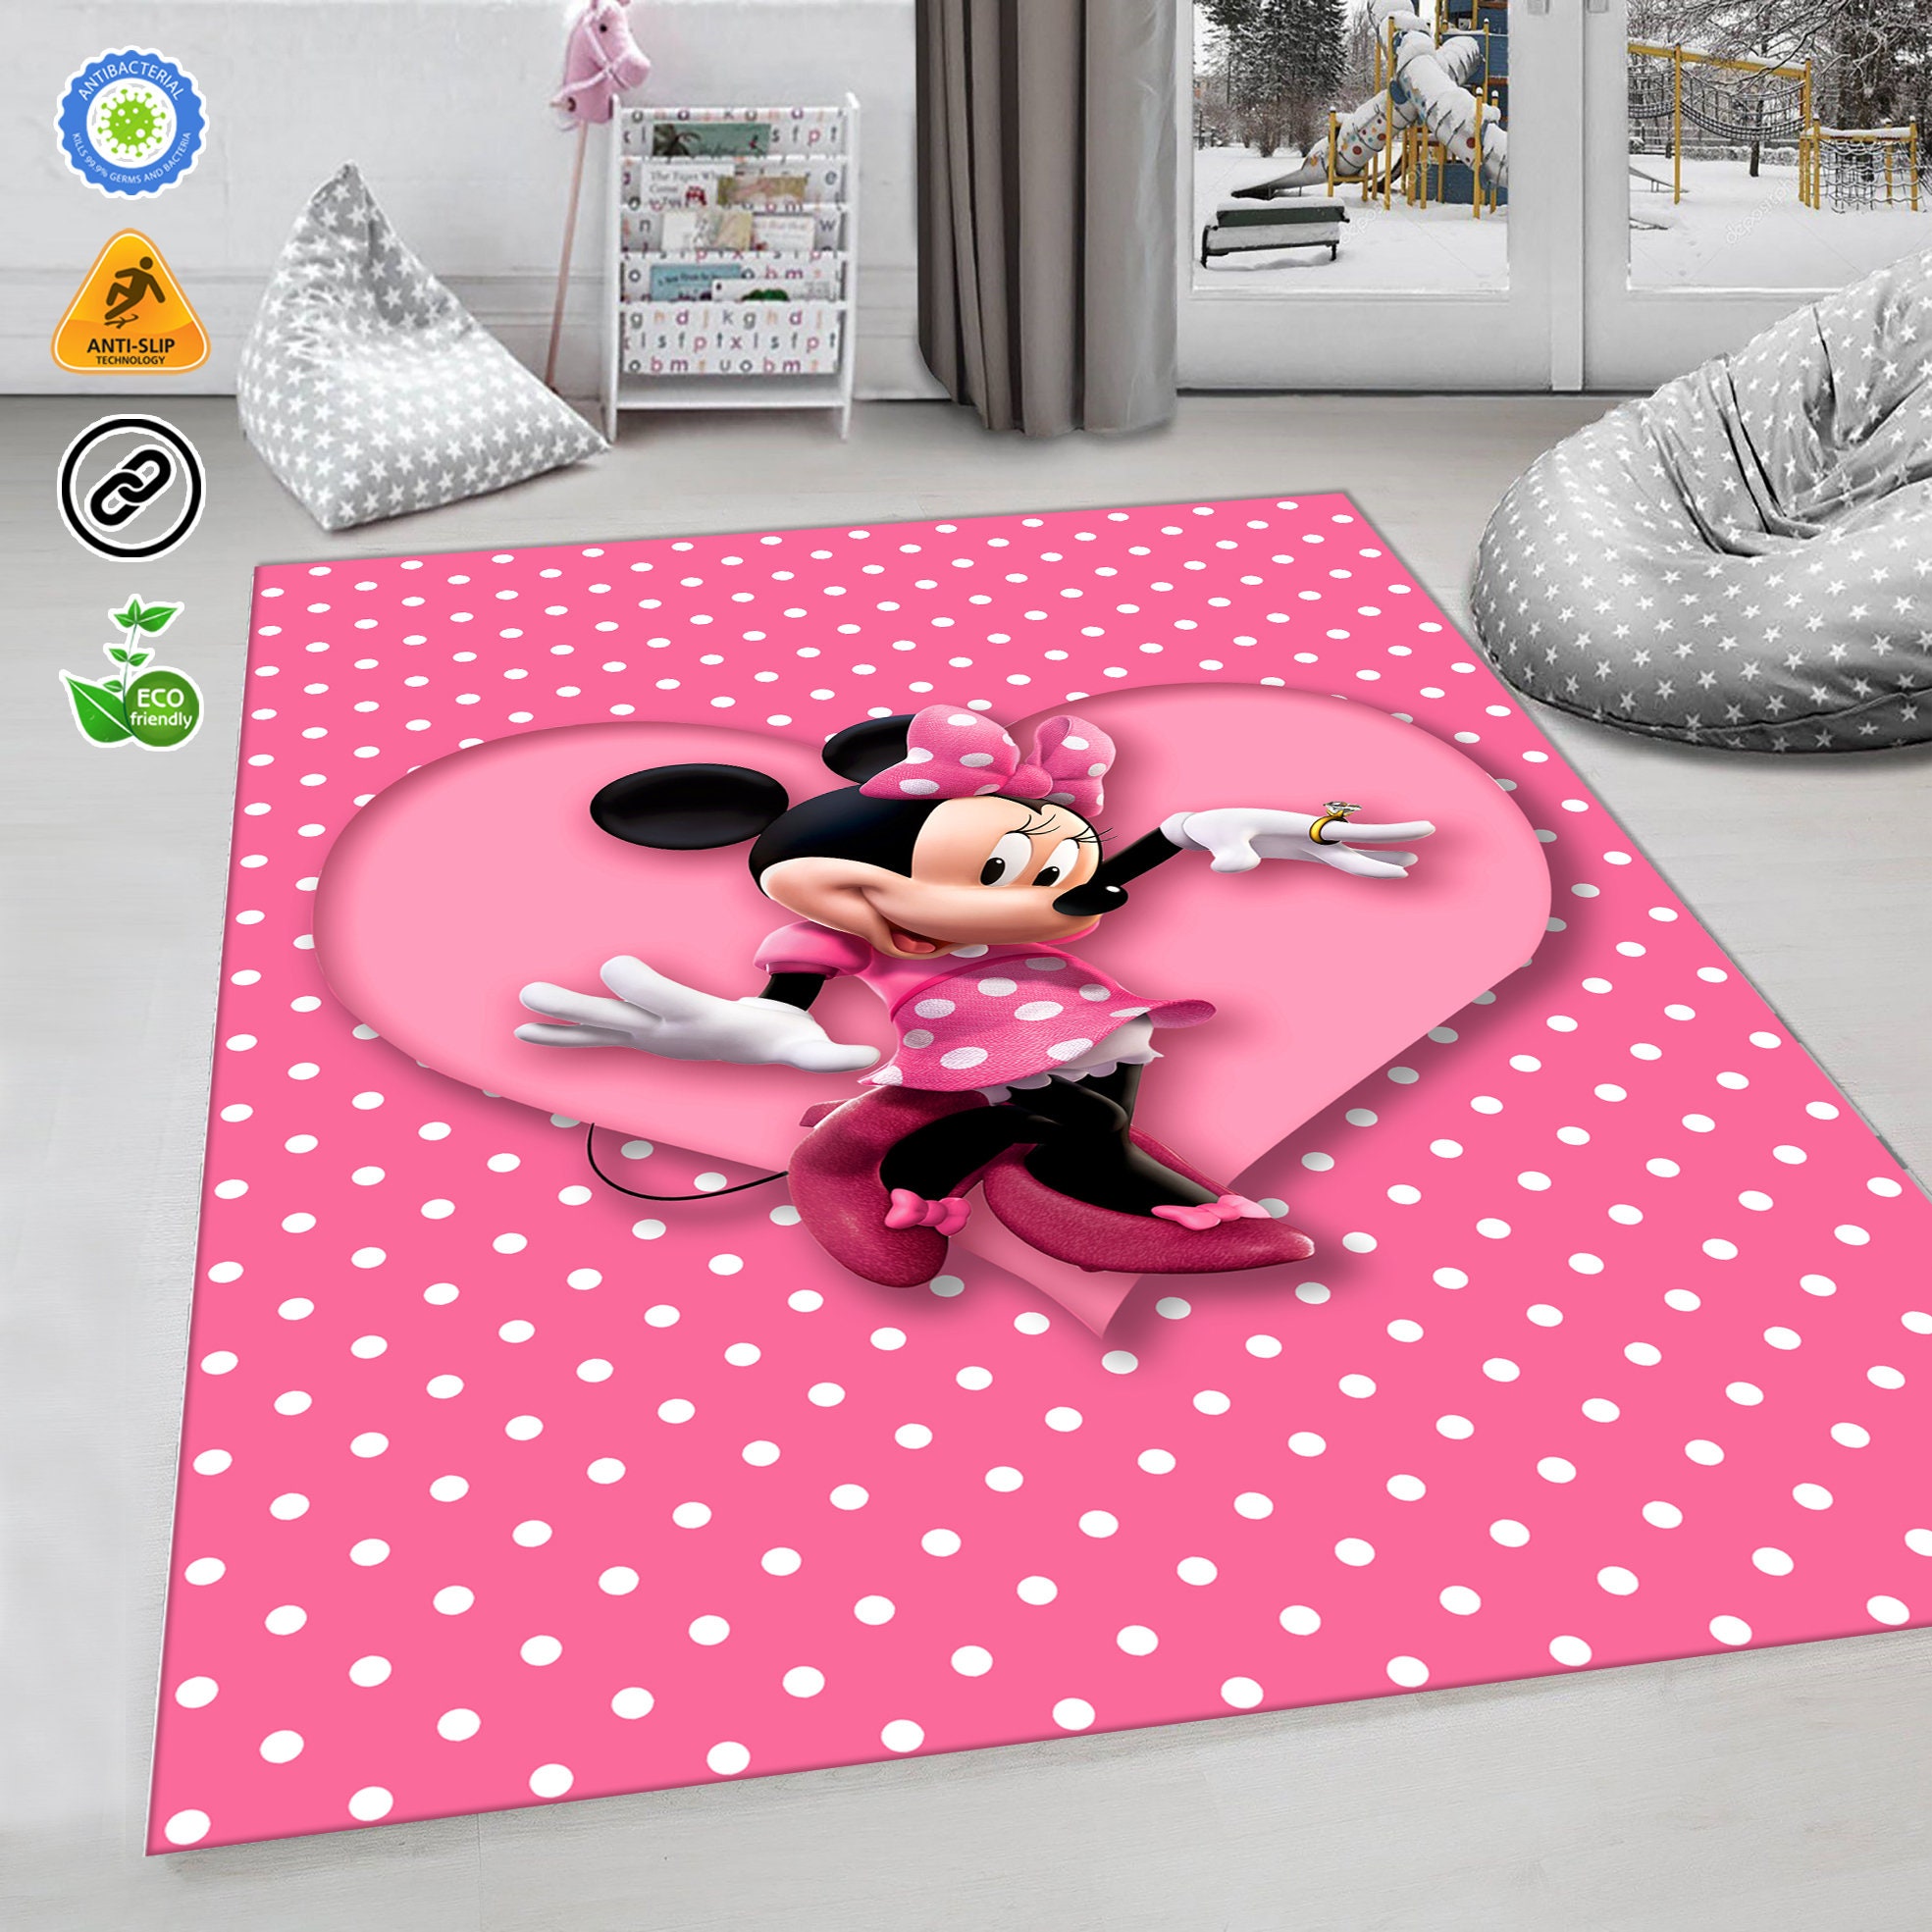 Discover Mickey Mouse Carpet, Minnie Mouse Carpet, Cute Carpet, Kids Room Decor, Baby Room Decor, Disney Rugs